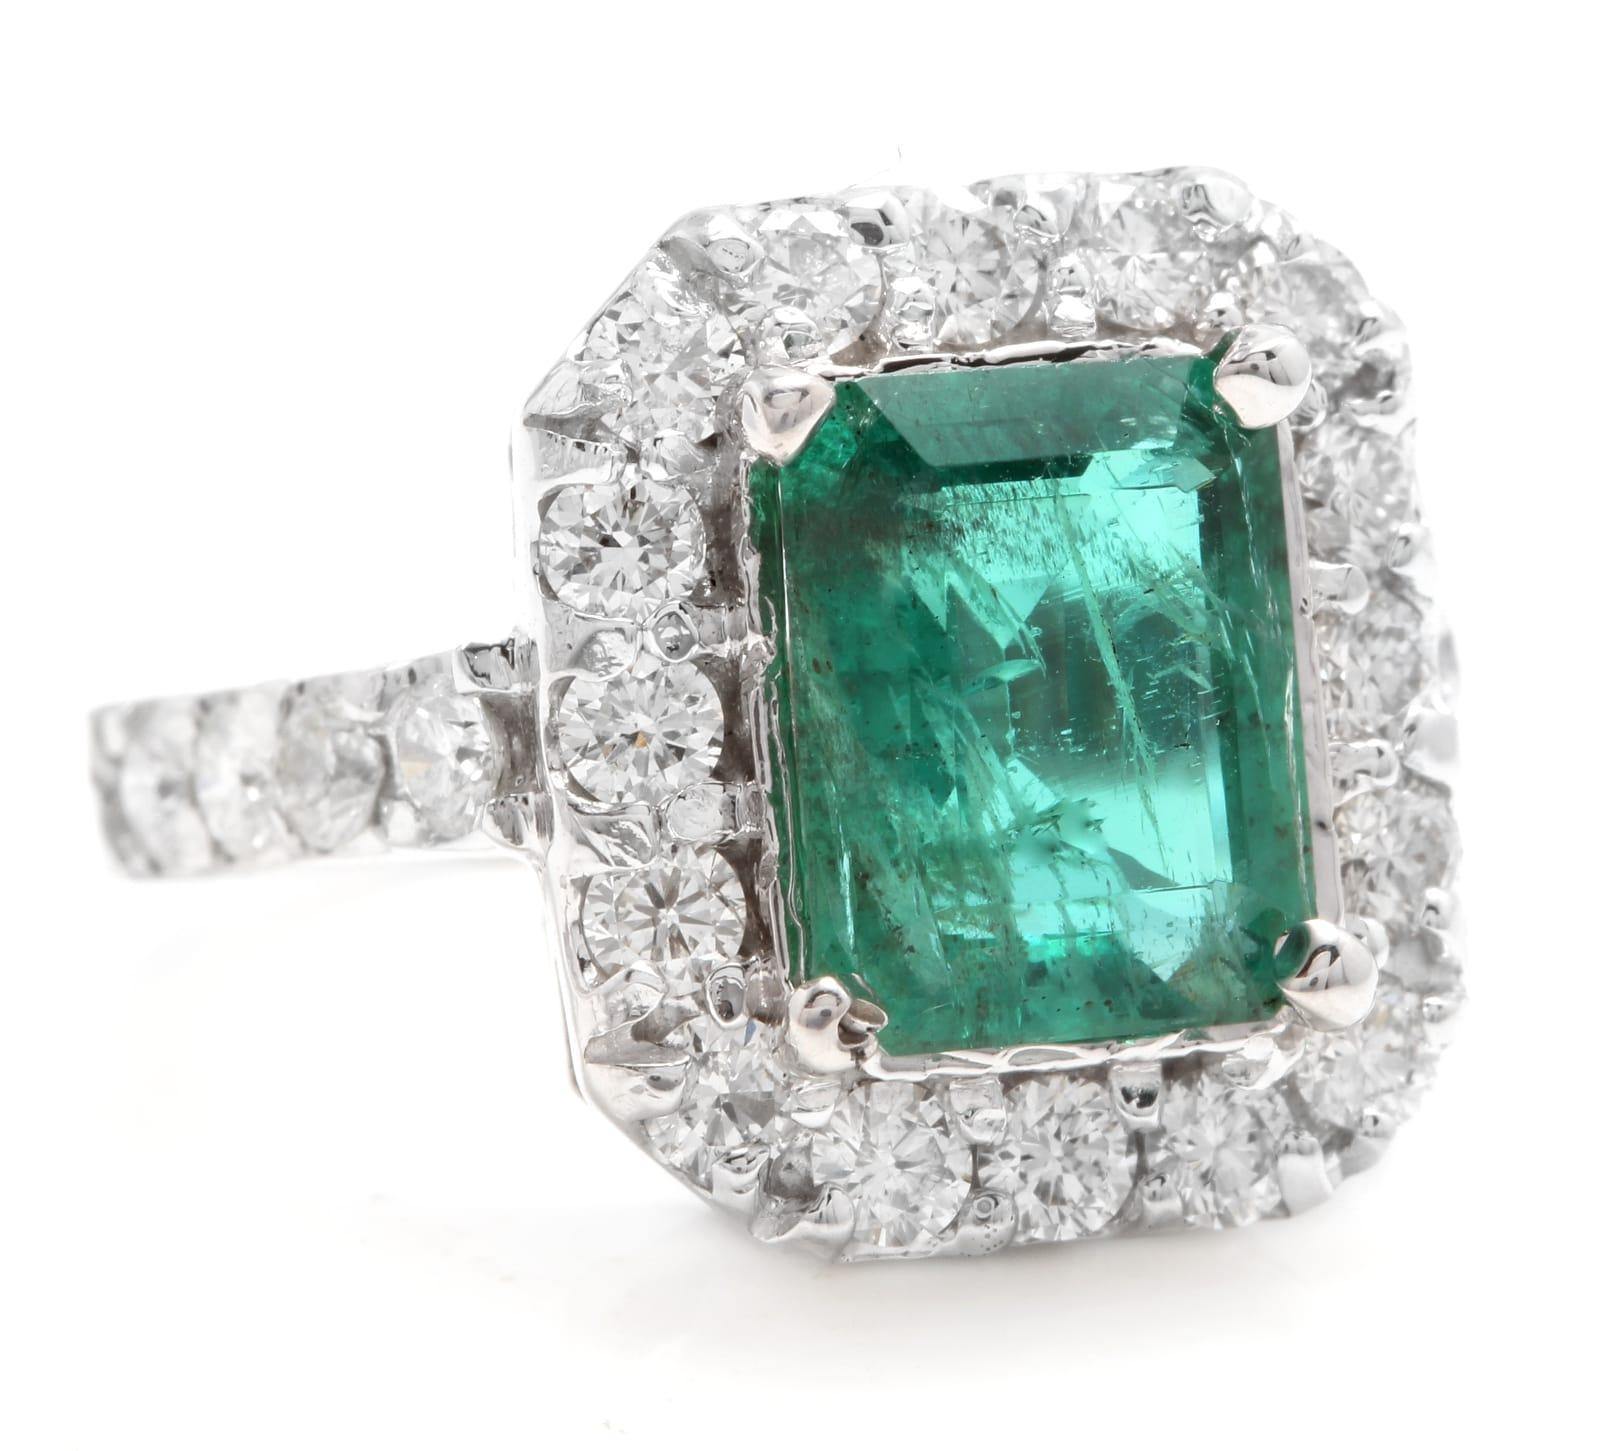 5.30 Carats Natural Emerald and Diamond 14K Solid White Gold Ring

Total Natural Green Emerald Weight is: Approx. 4.00 Carats (transparent)

Emerald Measures: Approx. 10 x 8mm

Emerald Treatment: Oiling

Natural Round Diamonds Weight: Approx. 1.30